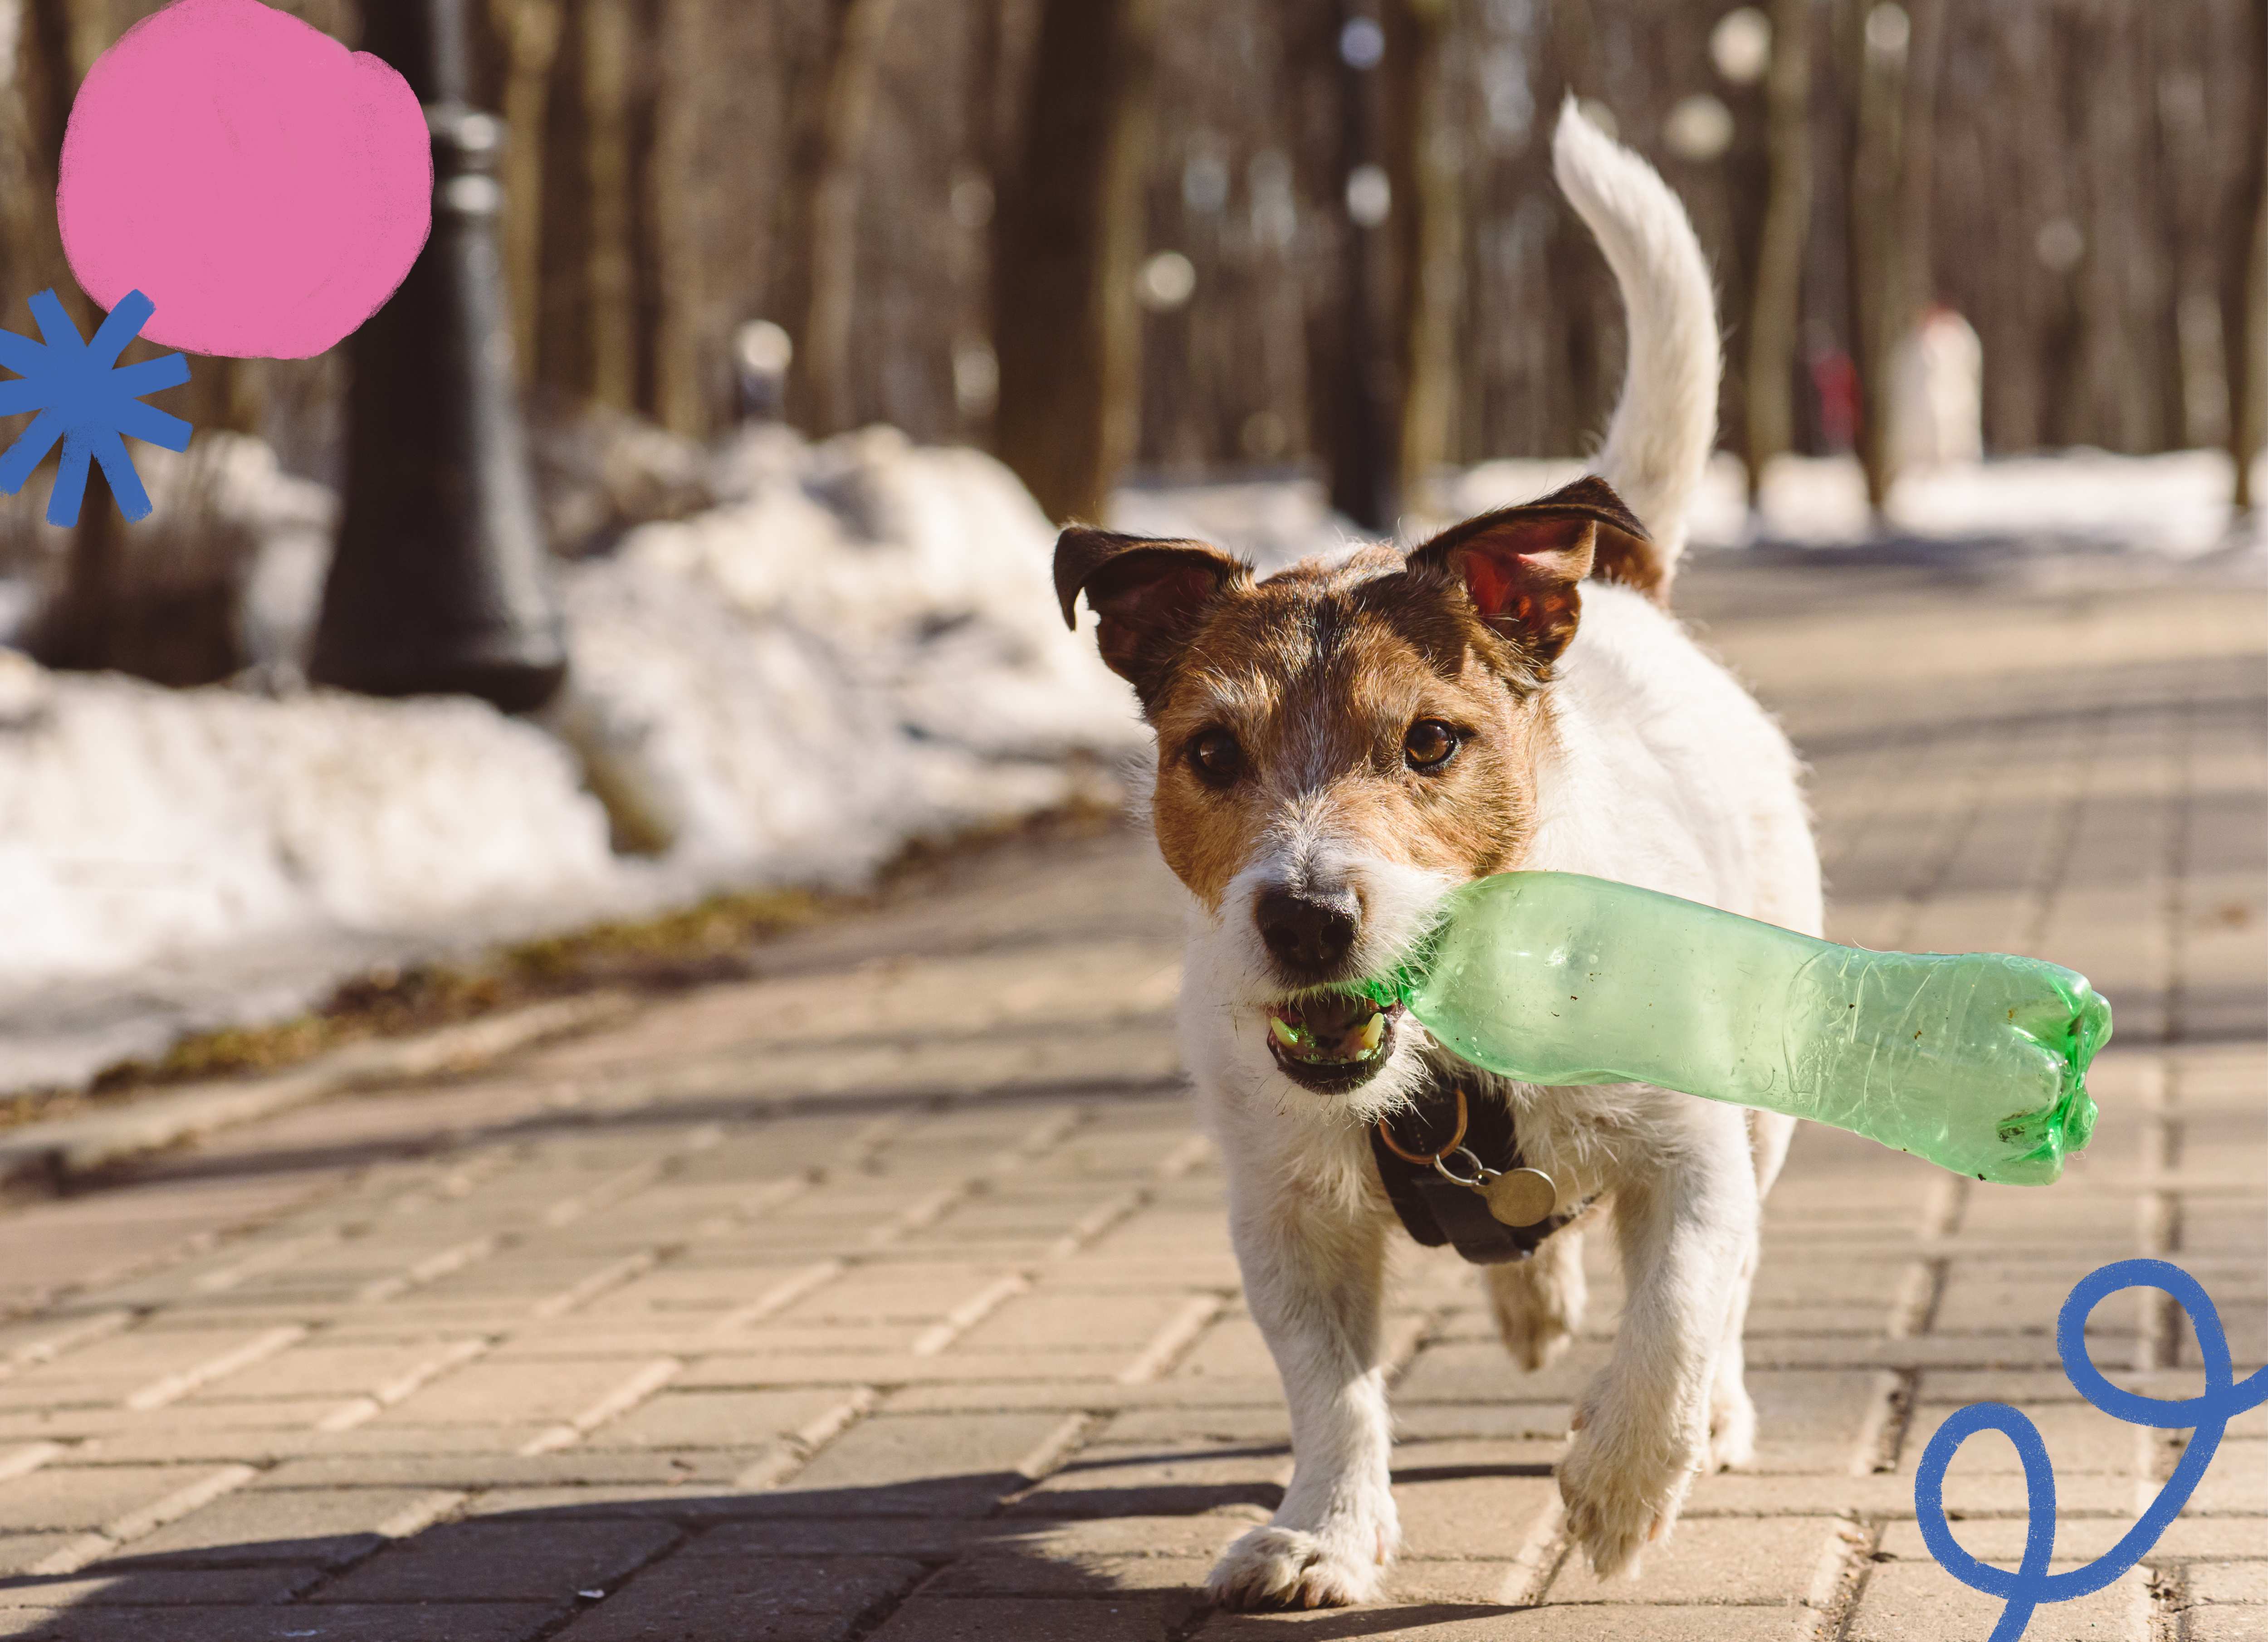 Jack Russell terrier walking outside with an empty plastic bottle in its mouth